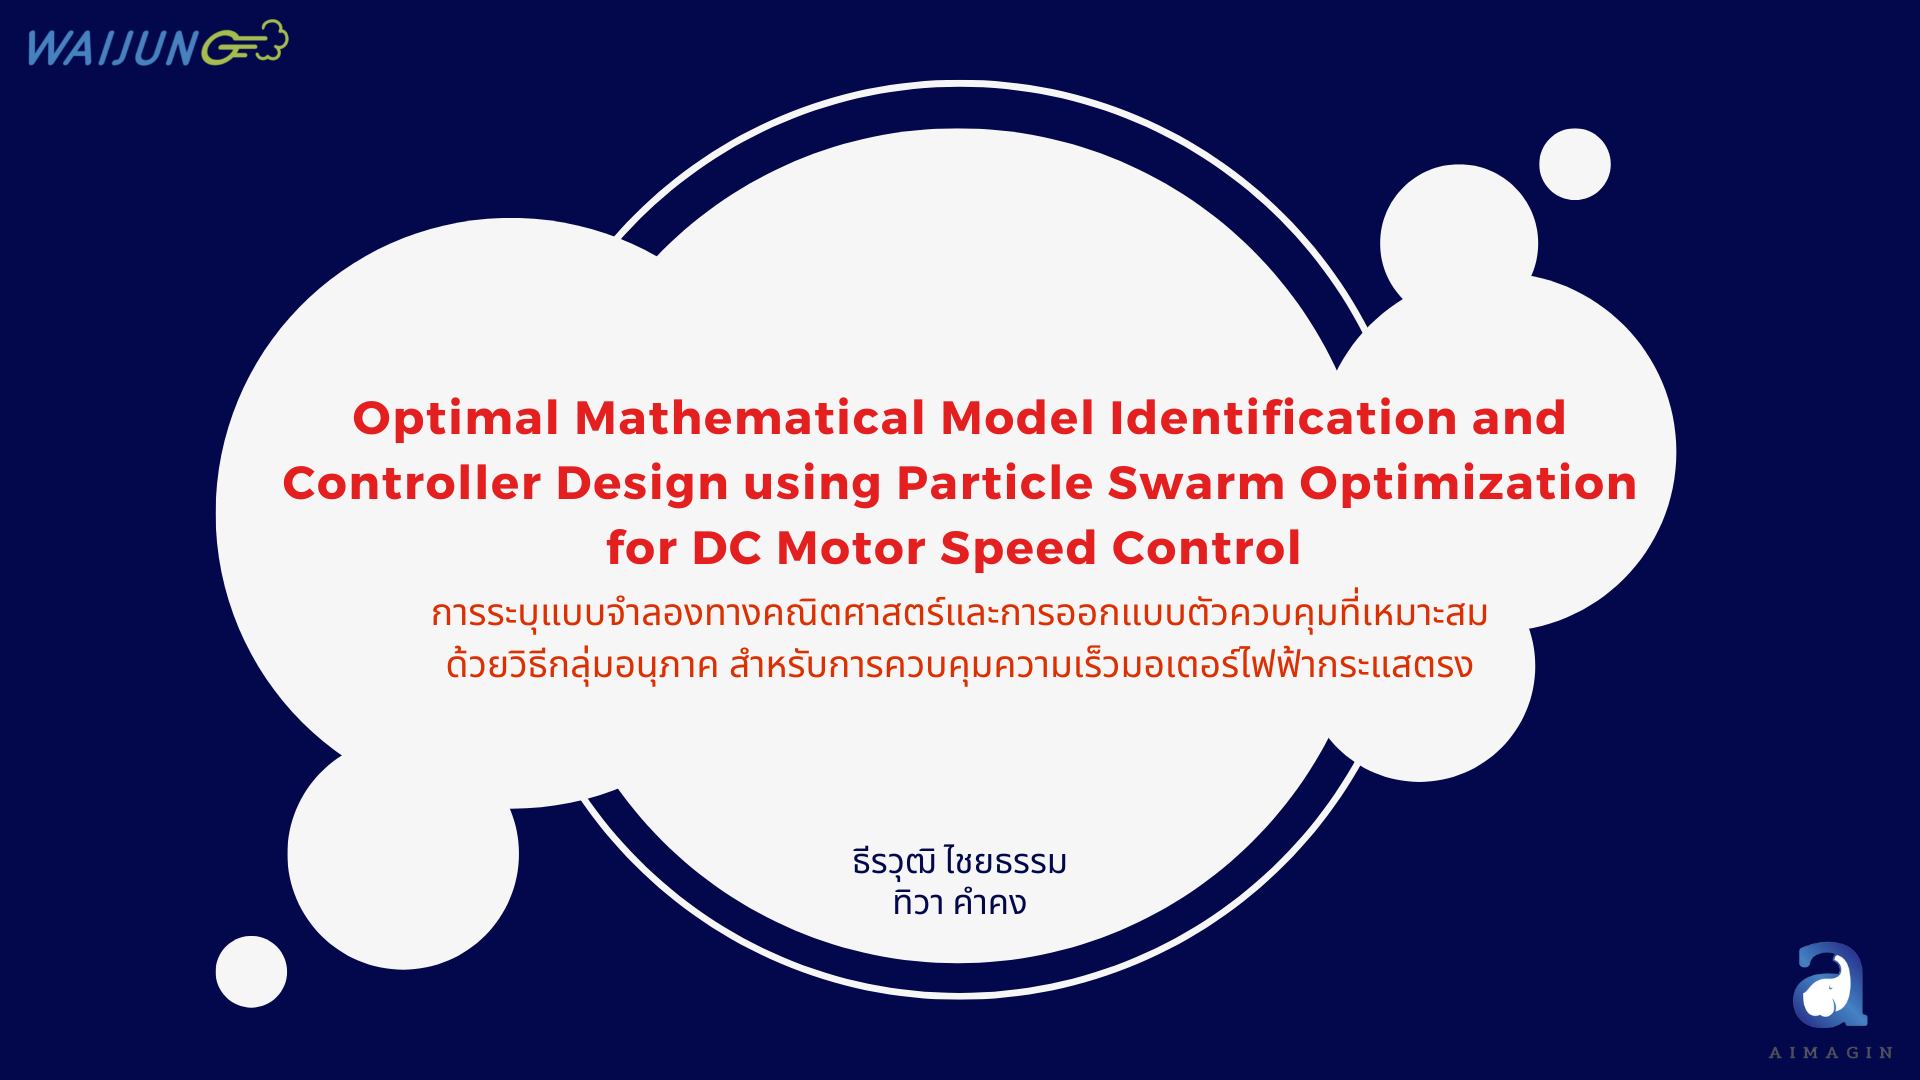 Optimal Mathematical Model Identification and Controller Design using Particle Swarm Optimization for DC Motor Speed Control